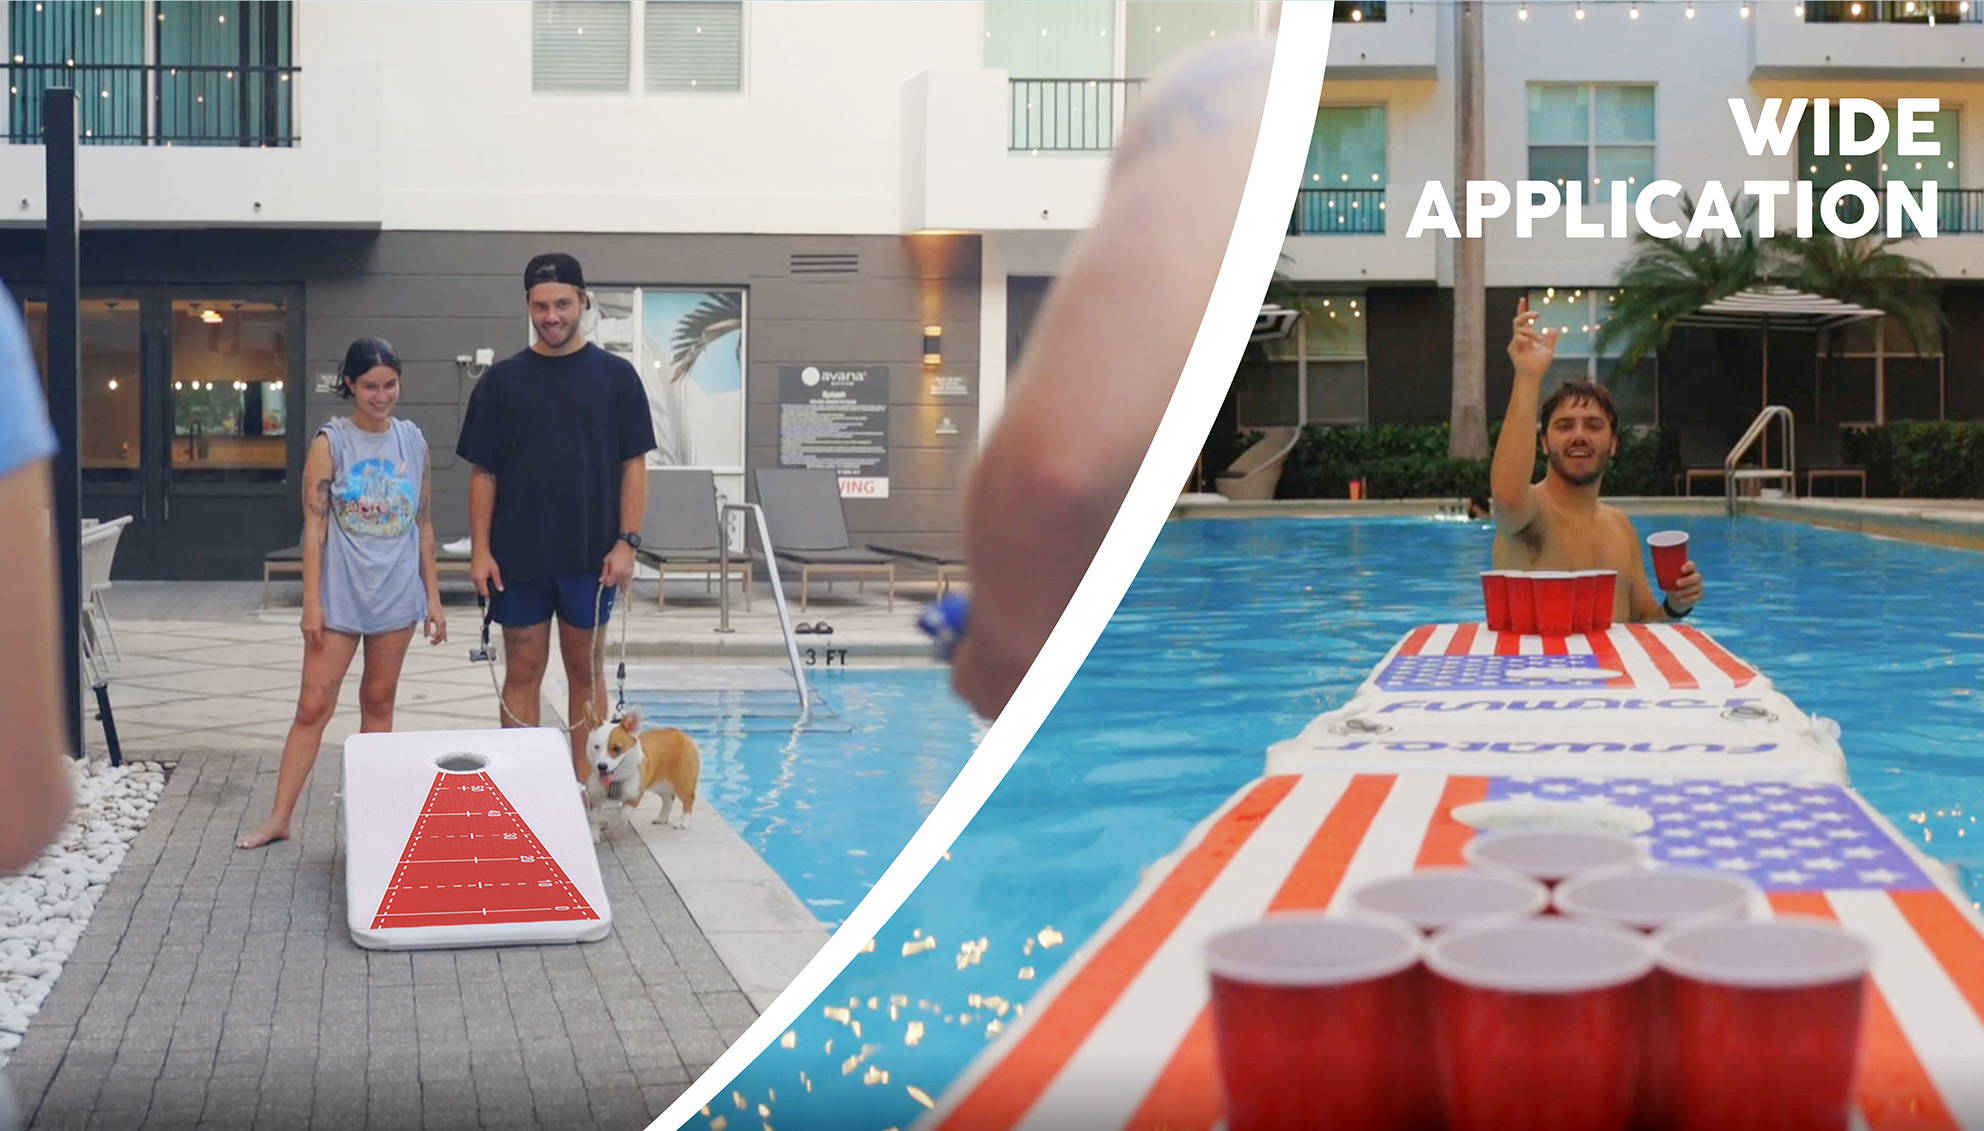 This inflatable cornhole can be used in a wide range of applications, both in the water and on land